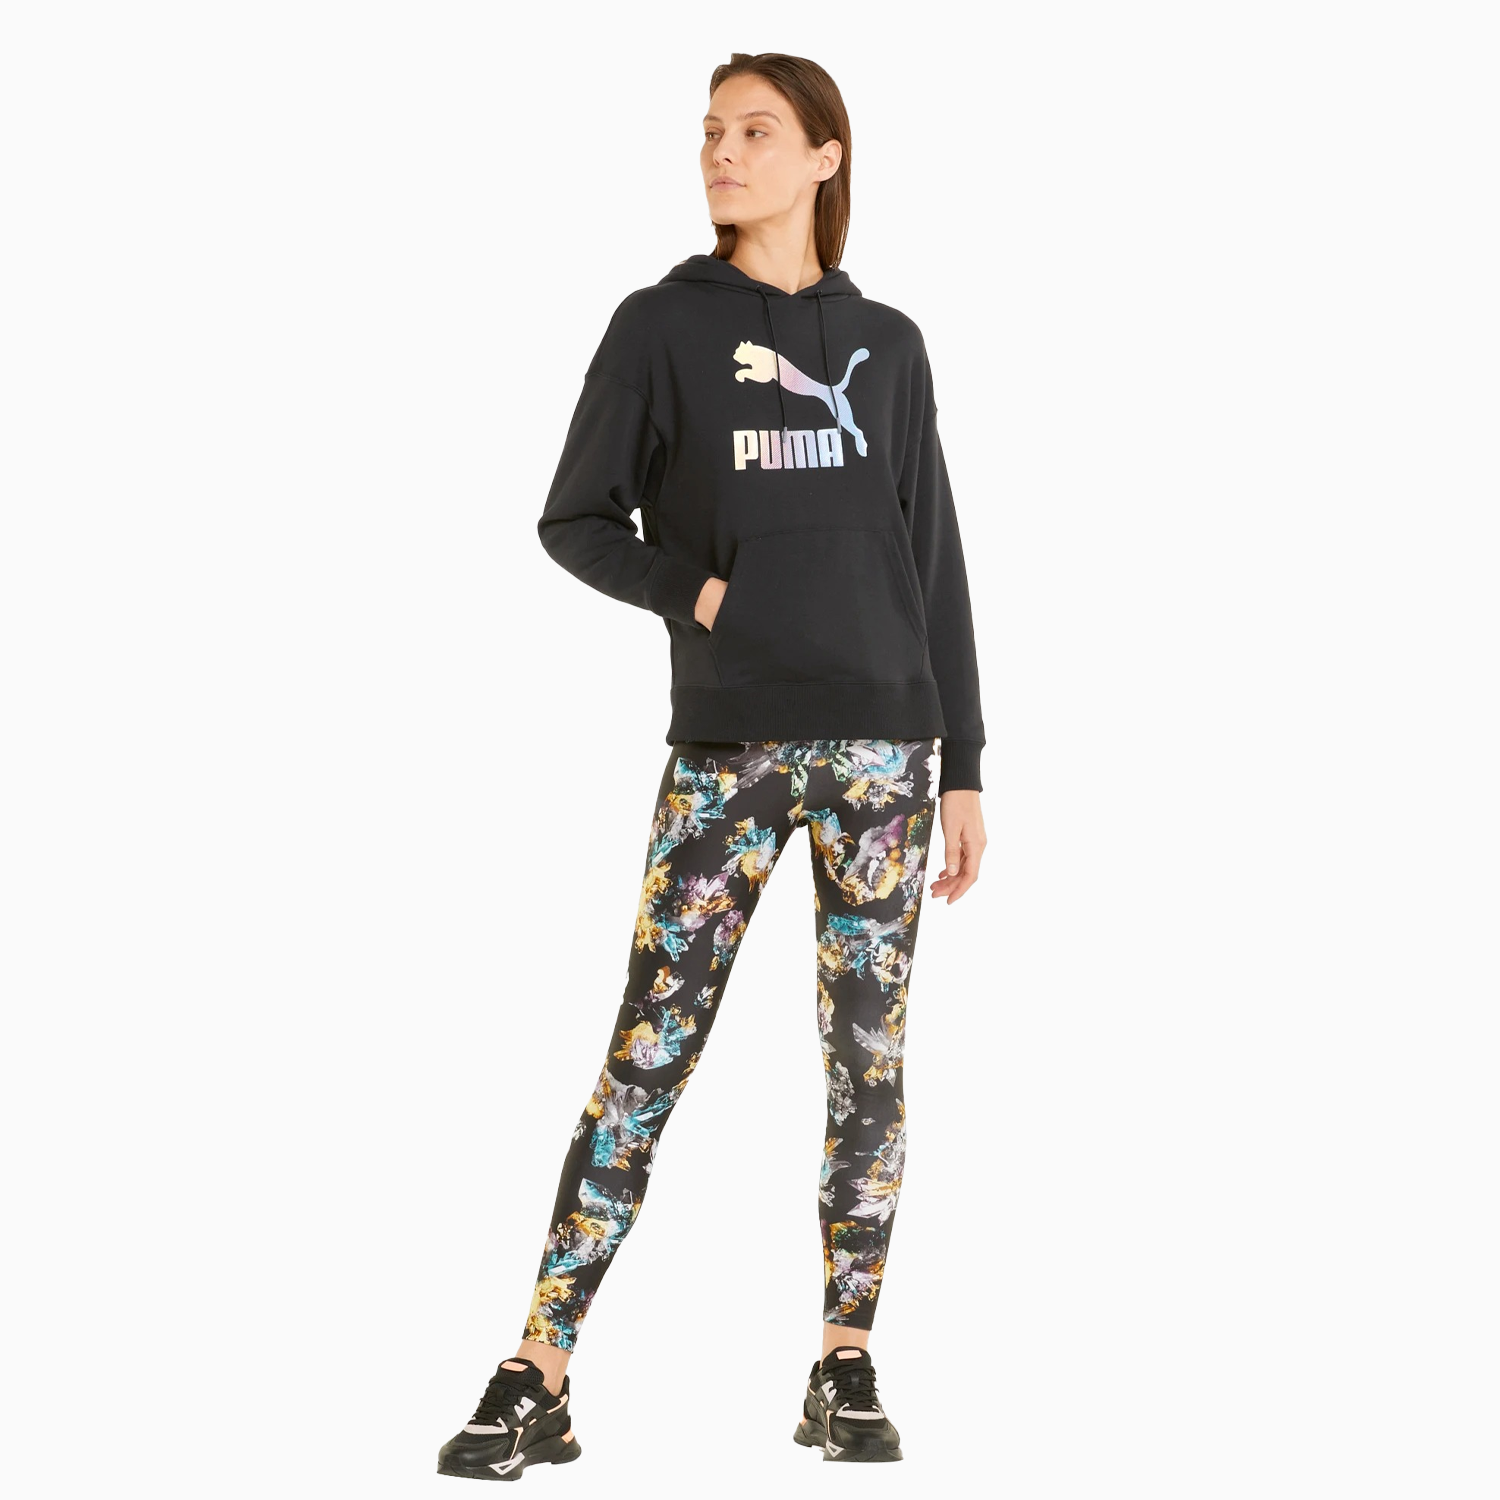 Puma Women's Crystal Galaxy Graphic Outfit - Color: Black - Tops and Bottoms USA -